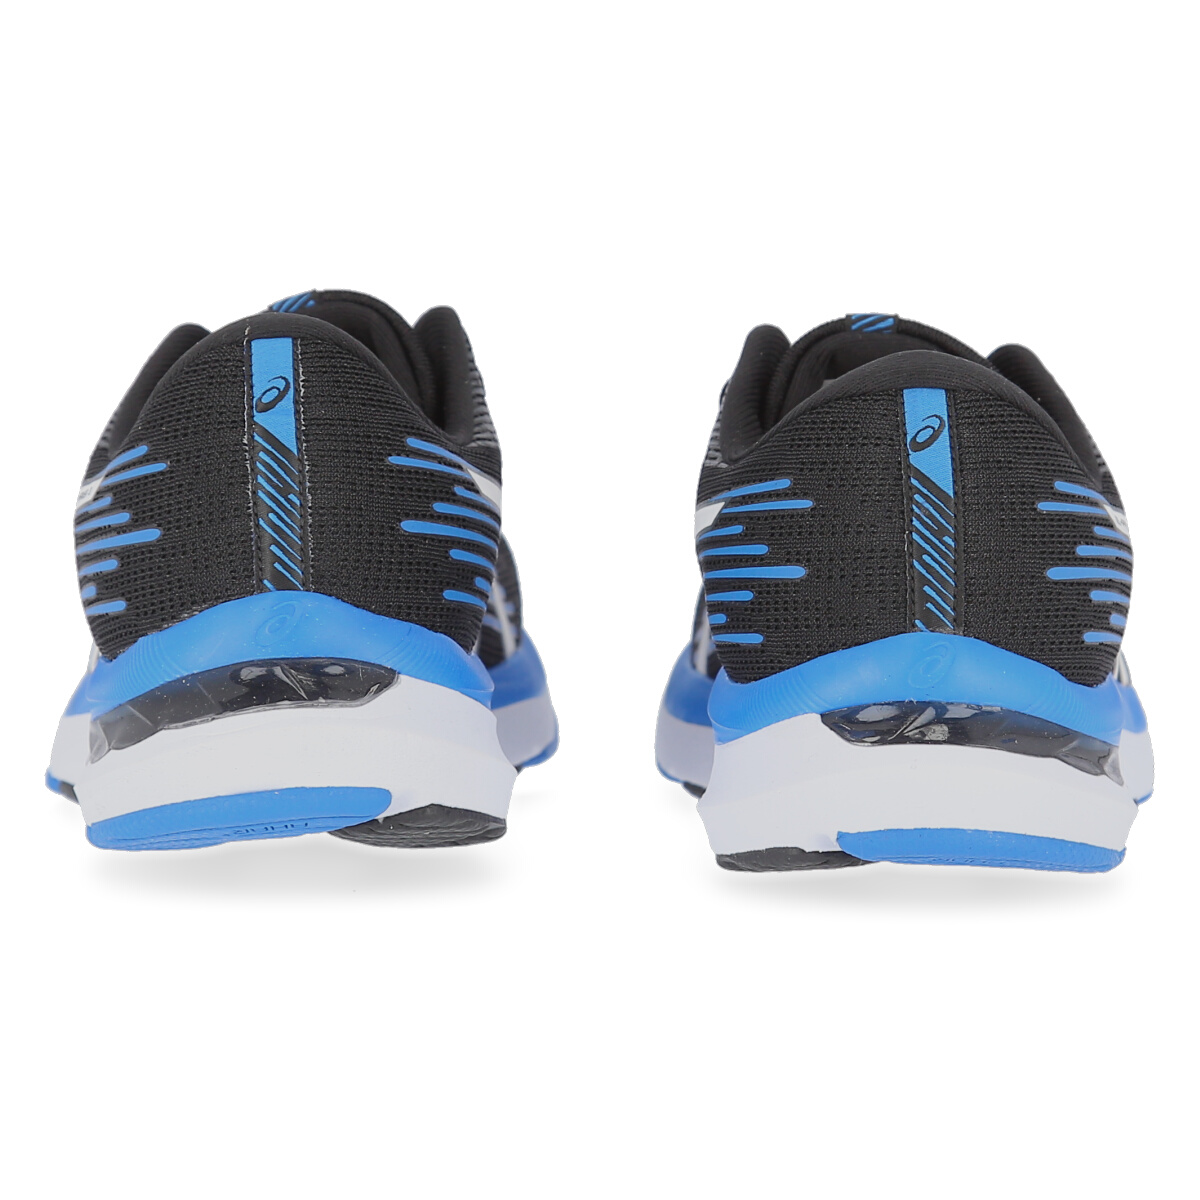 Zapatillas Asics Gel-Pacemaker 3,  image number null